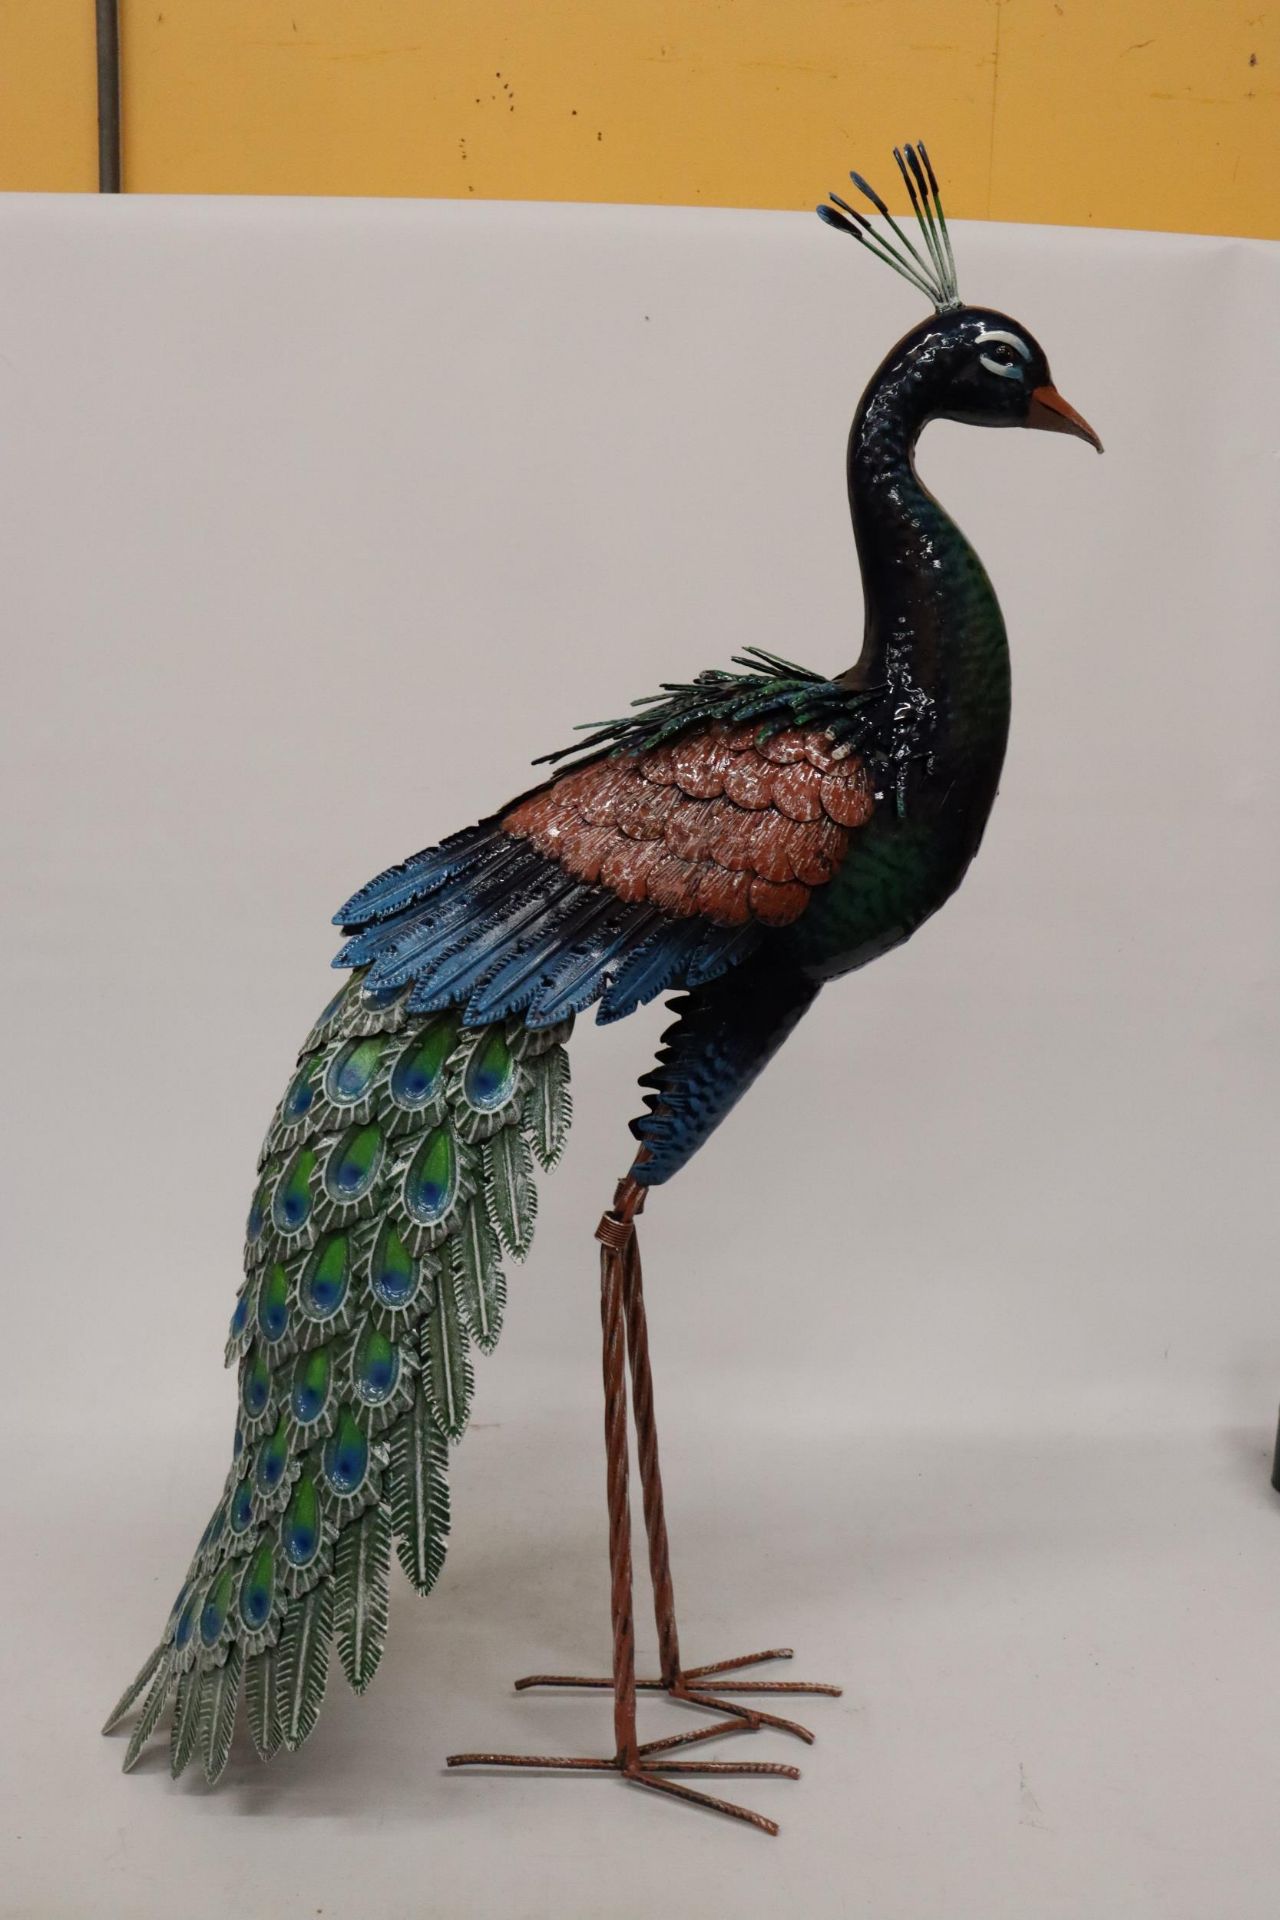 A HEAVY METAL PAINTED PEACOCK GARDEN ORNAMENT, 1 METRE HIGH - Image 7 of 8